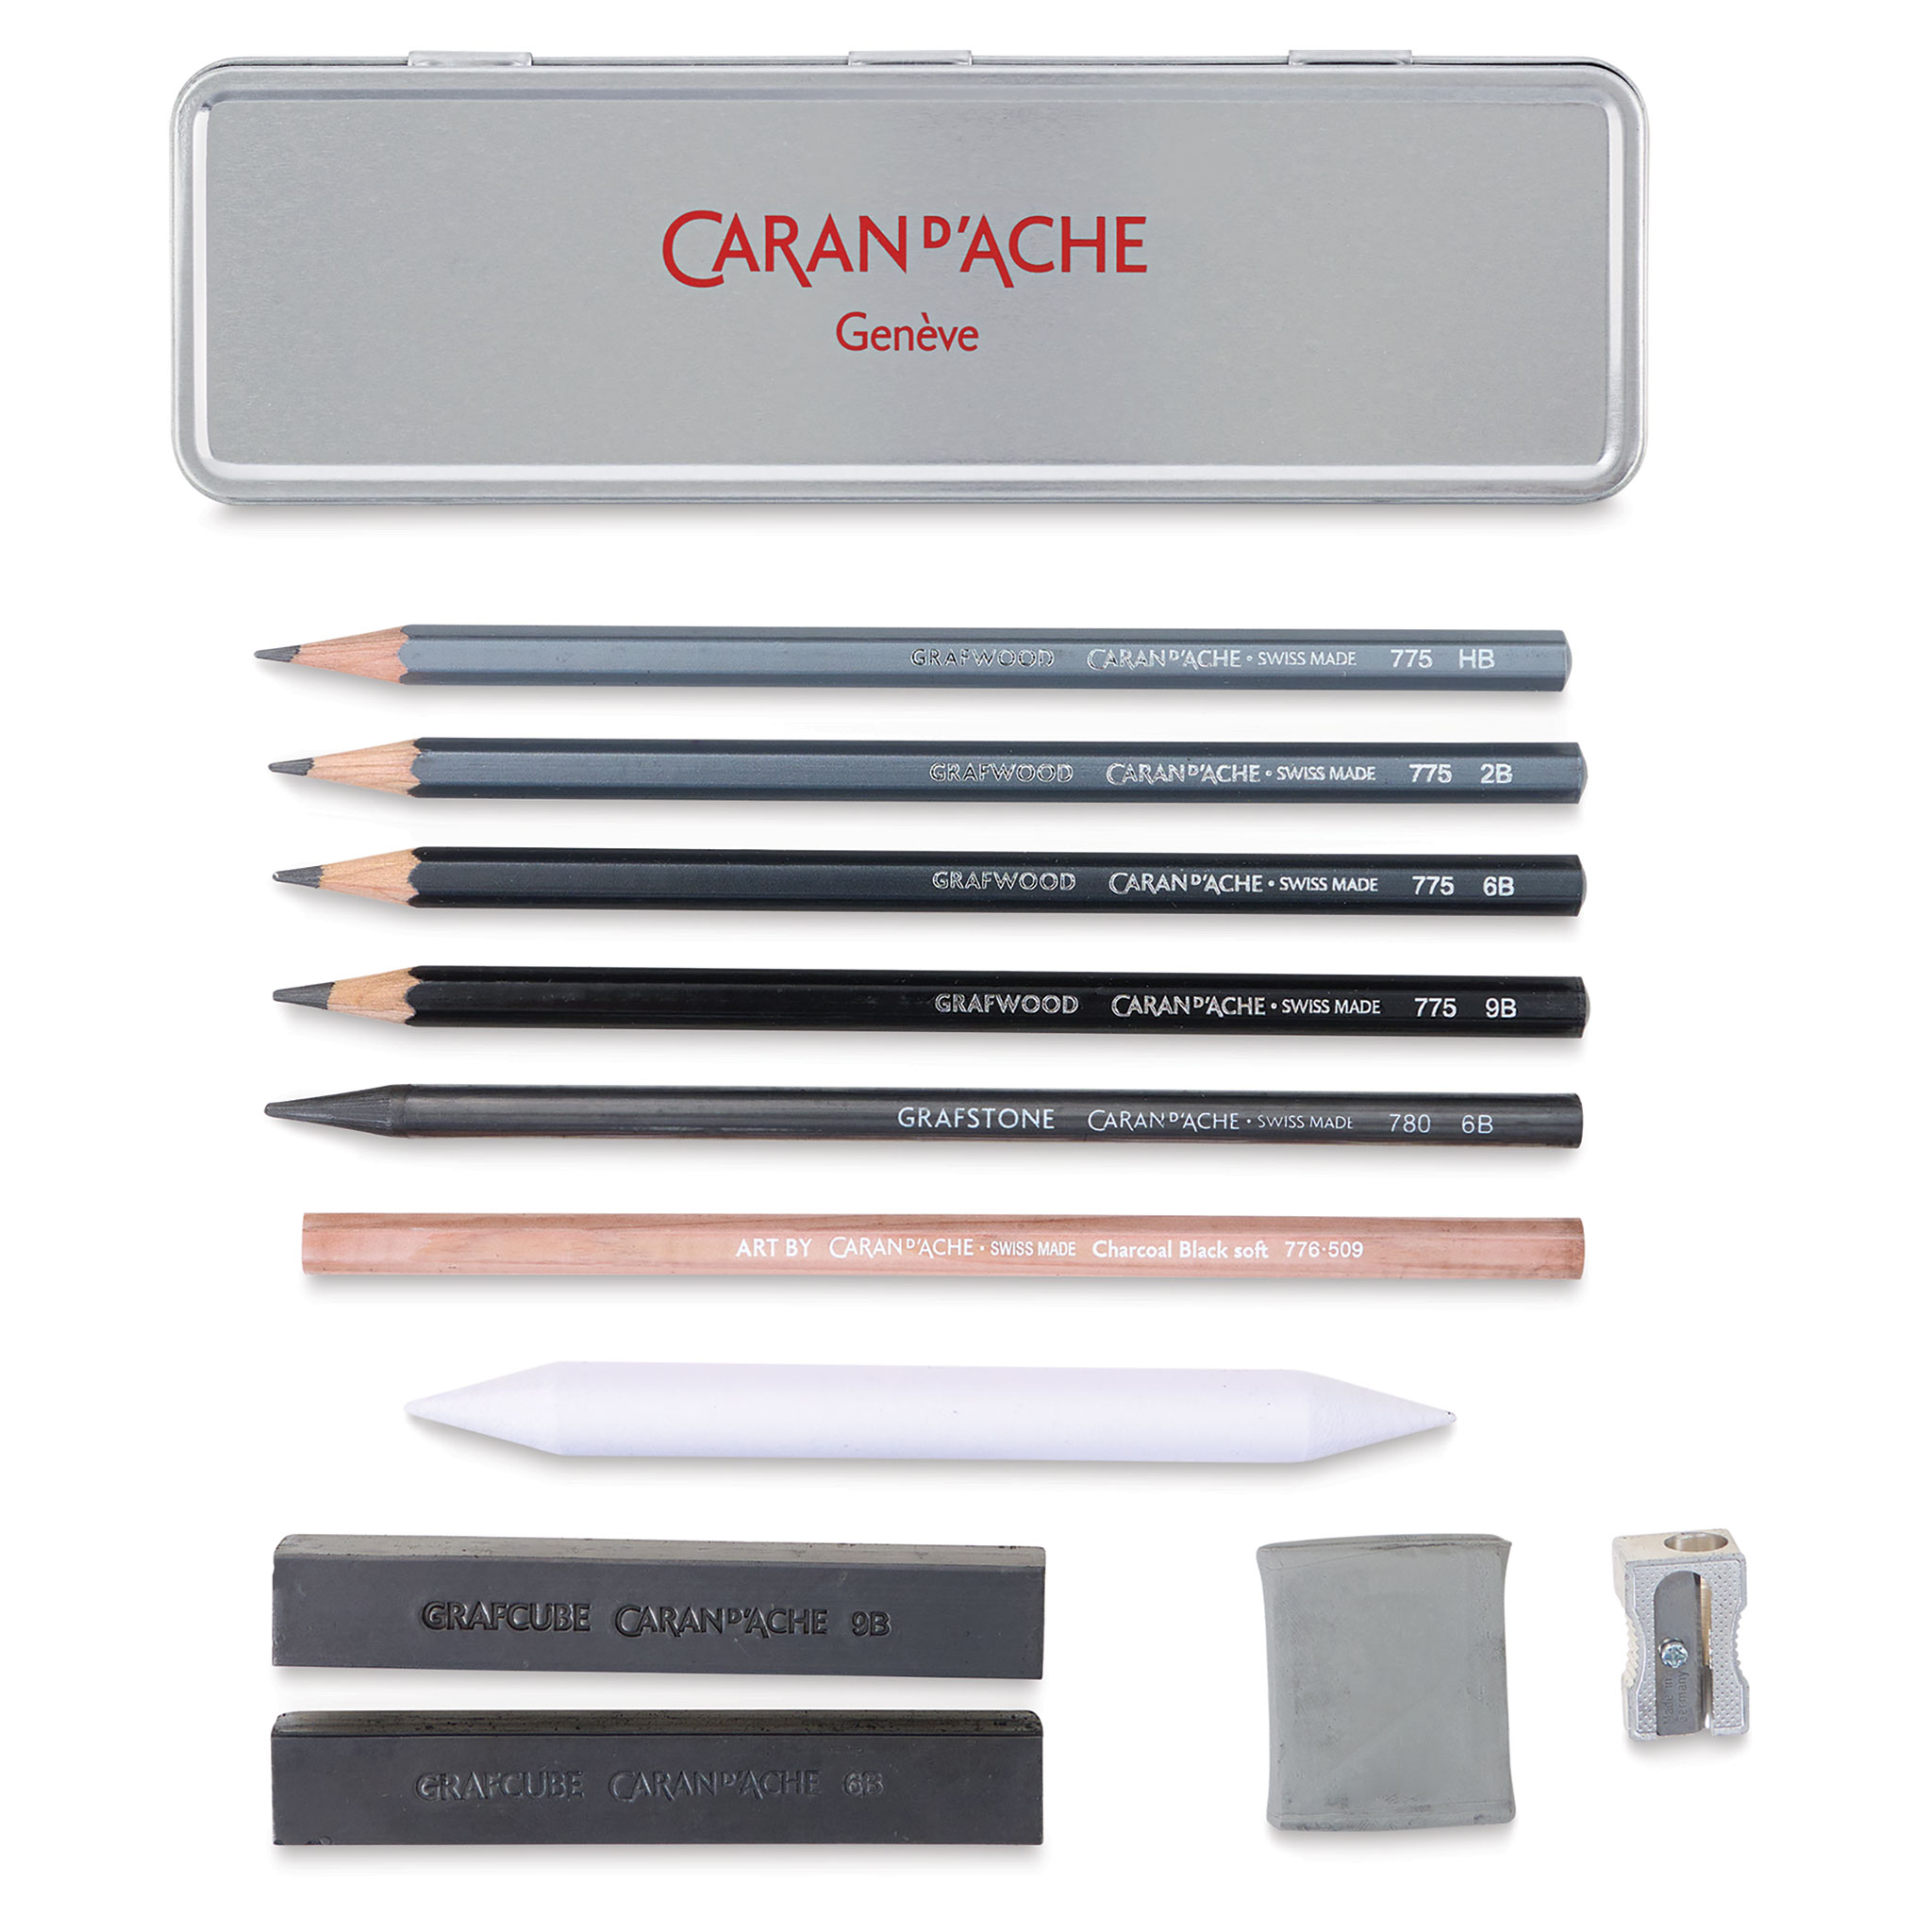 Graphite powder has so many uses in - Utrecht Art Supplies